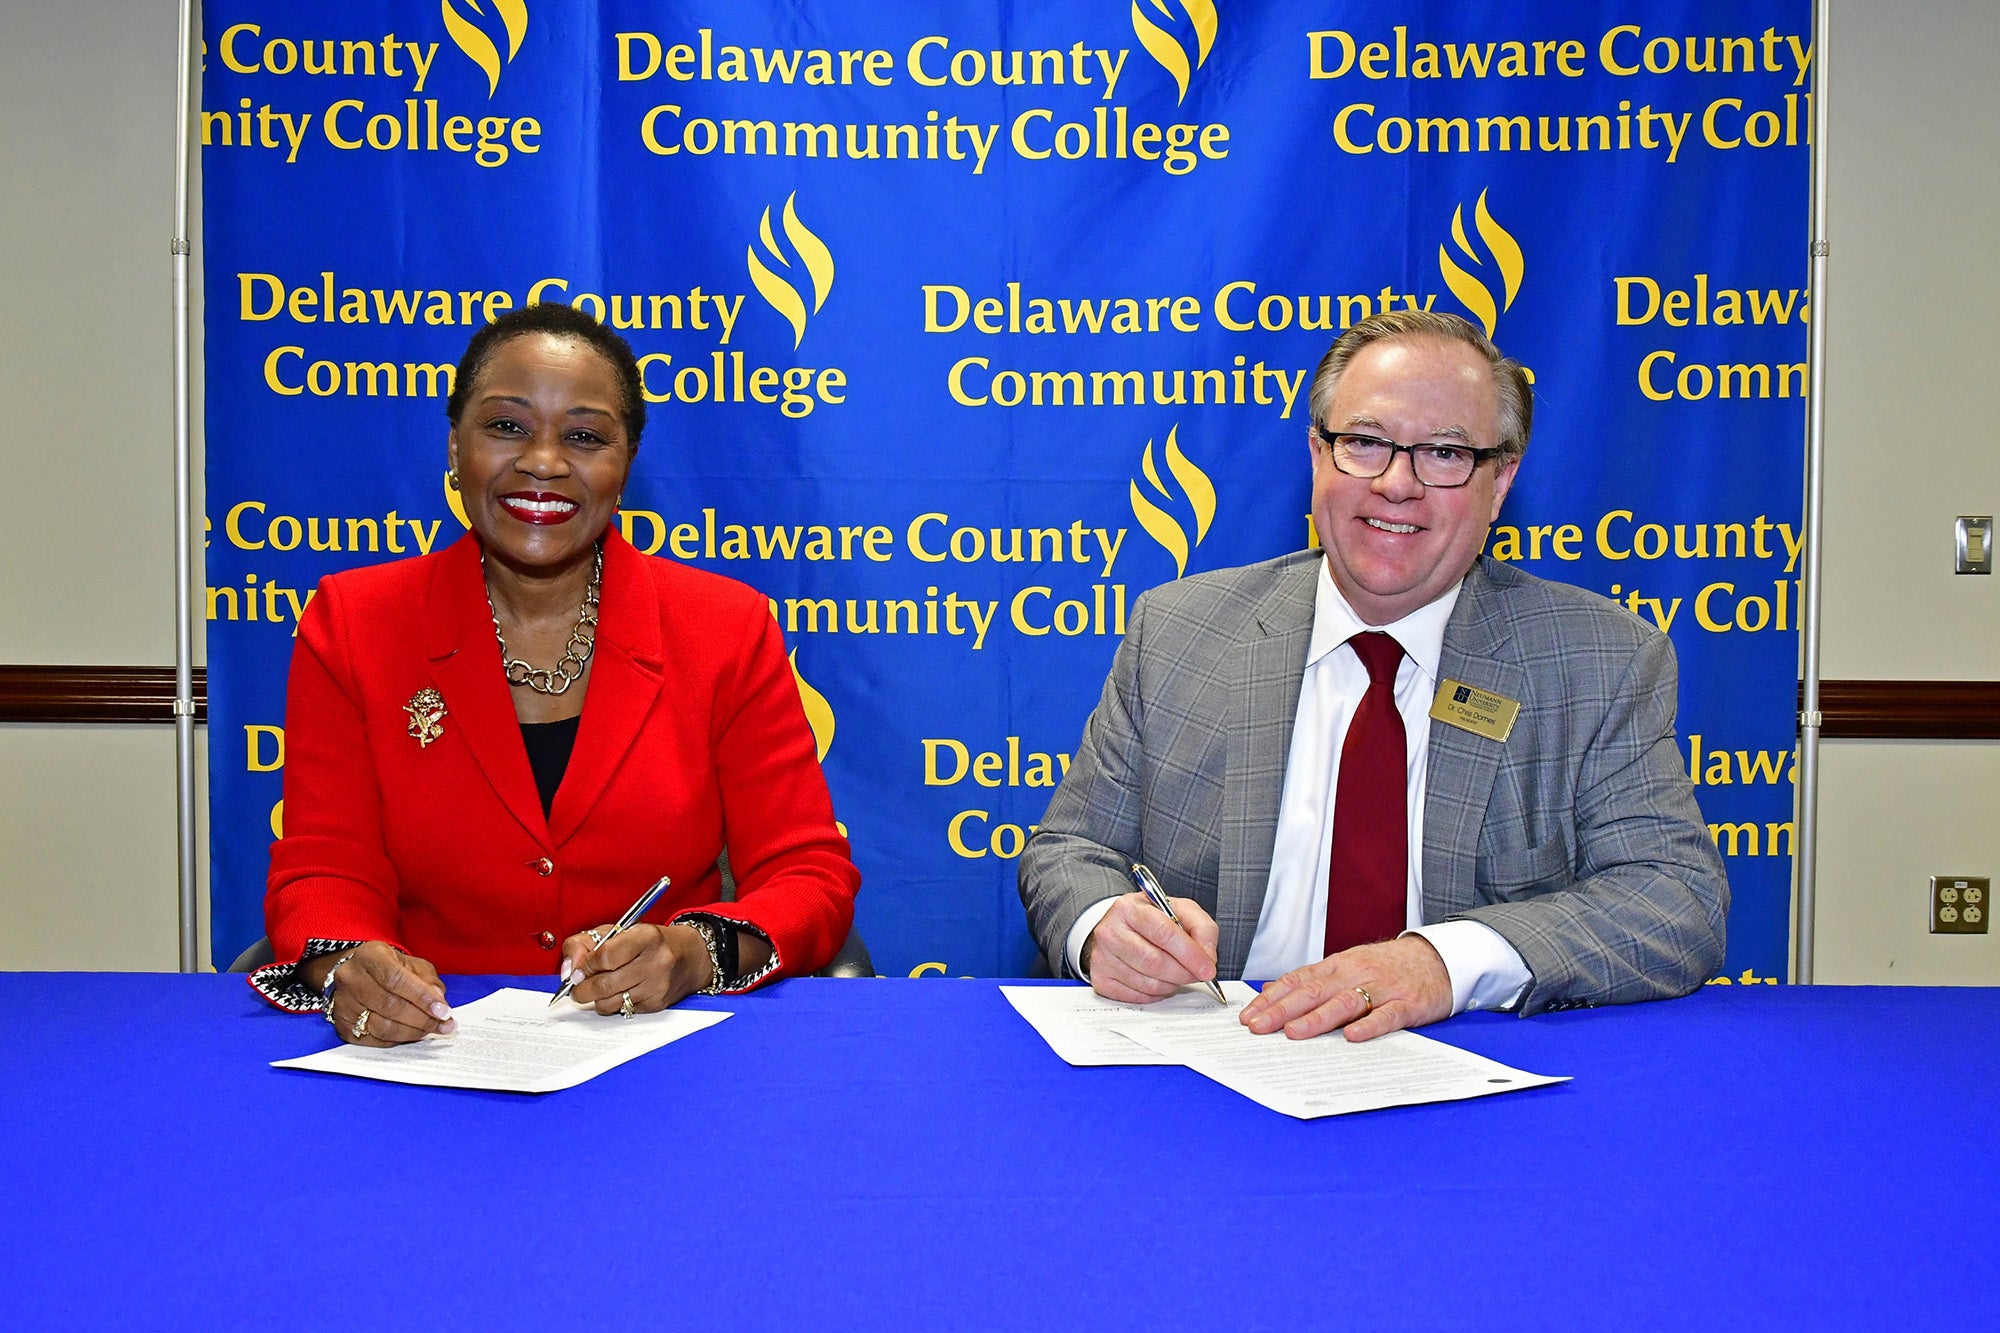 Delaware County Community College President Dr. L. Joy Gates Black and Neumann University President Dr. Chris Domes sign a new agreement that will benefit Neumann University criminal justice majors